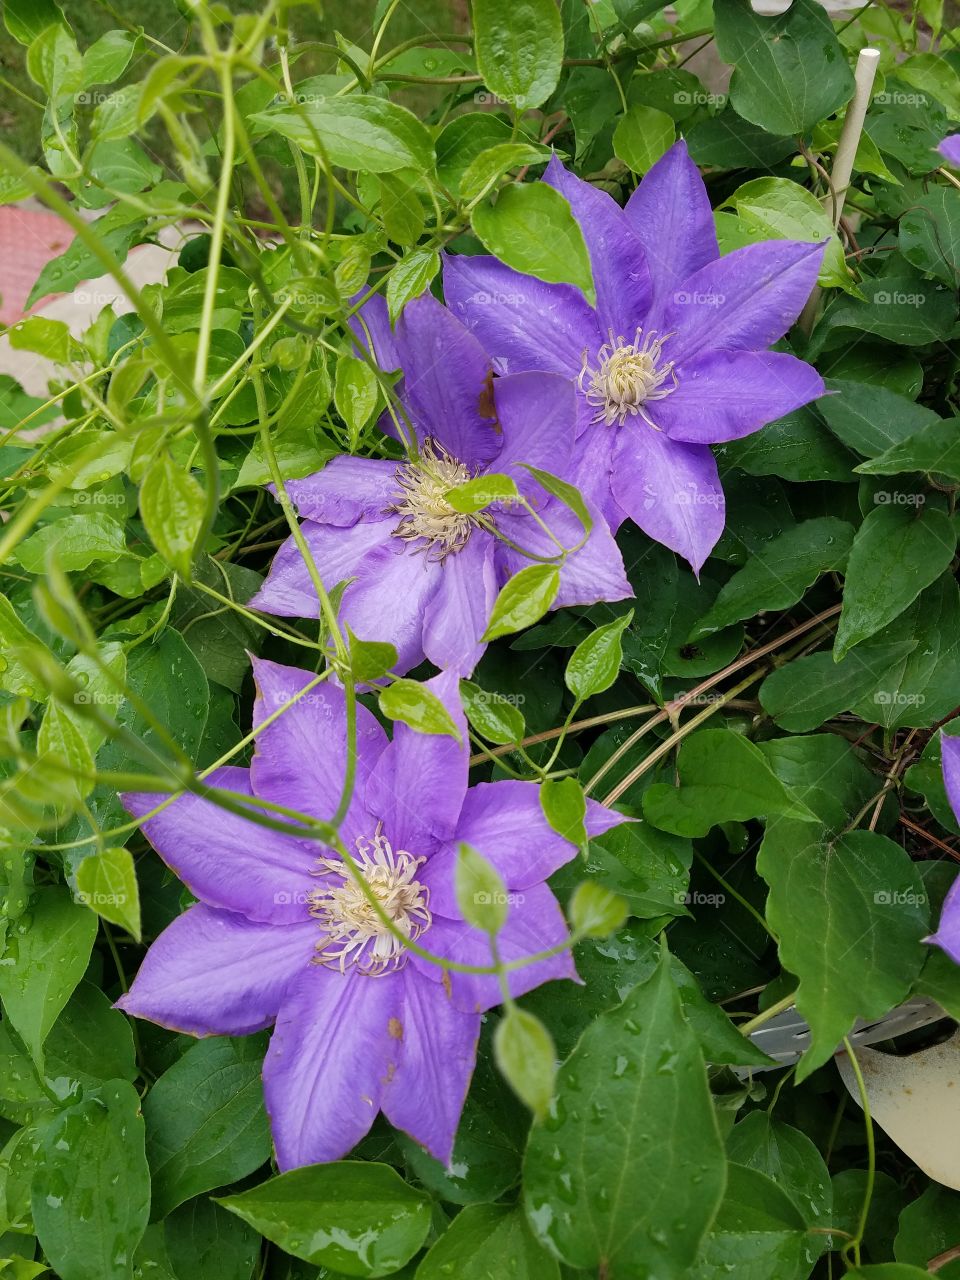 star shaped purple flower with green leaf backdrop